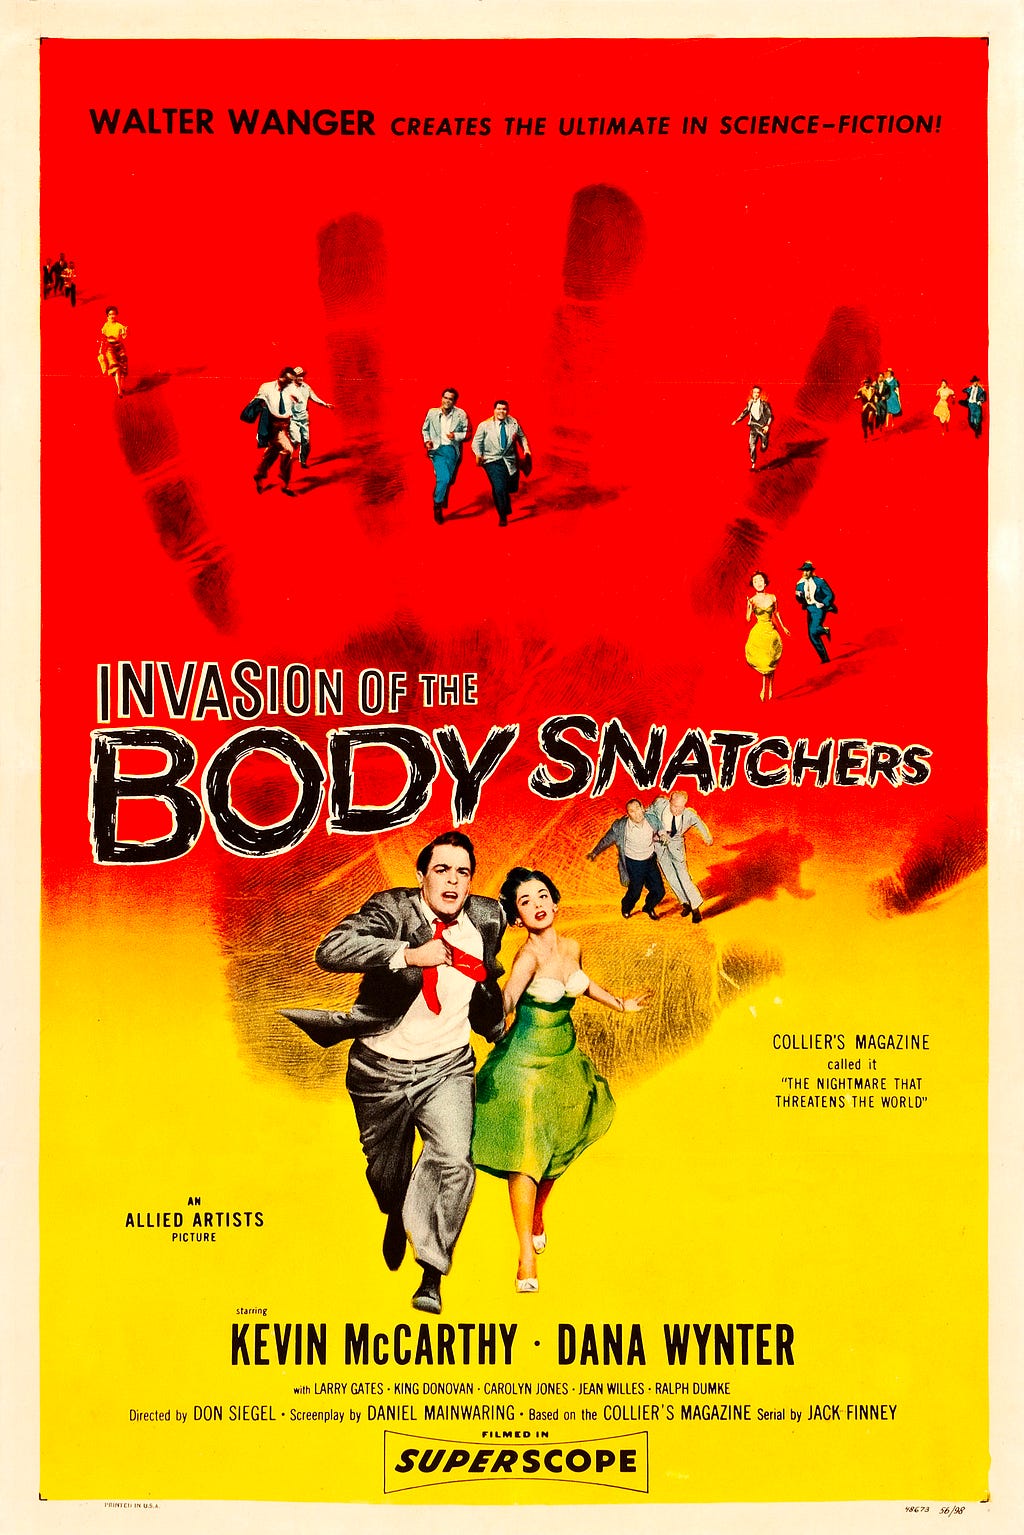 1950’s poster for Invasion of the Body Snatchers